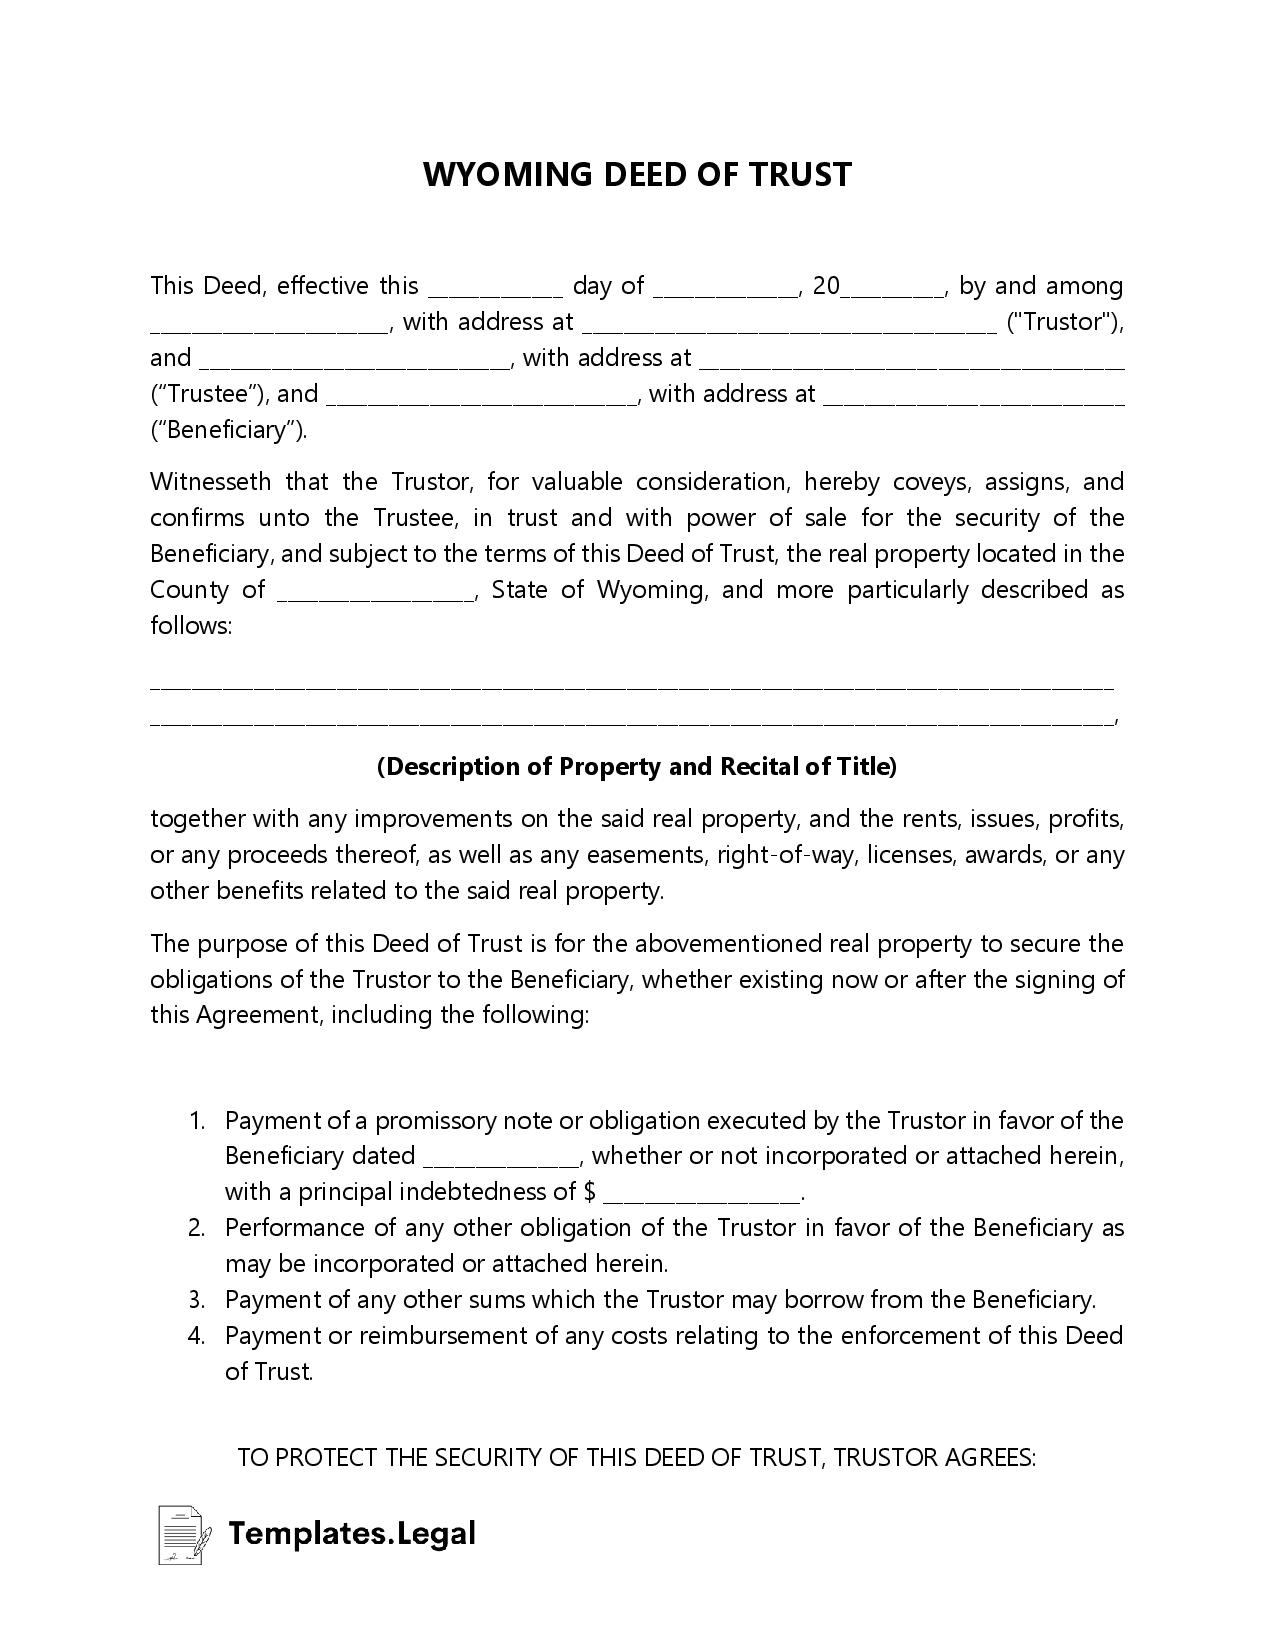 Wyoming Deed of Trust - Templates.Legal